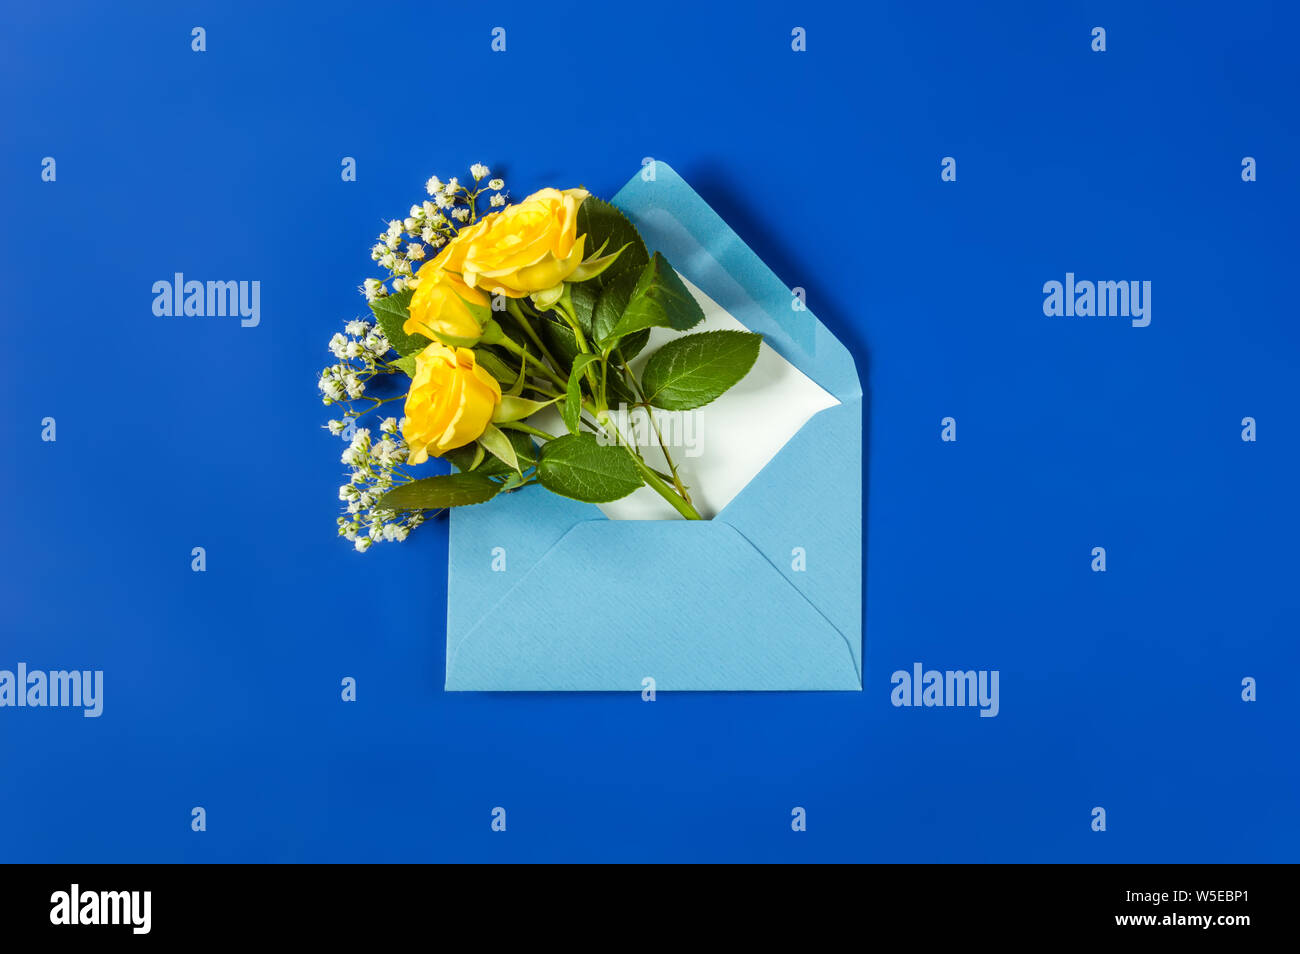 Yellow roses and white Gypsophila in light blue envelope close-up on blue background. Top view, flat lay. Template for greeting card. Festive floral b Stock Photo